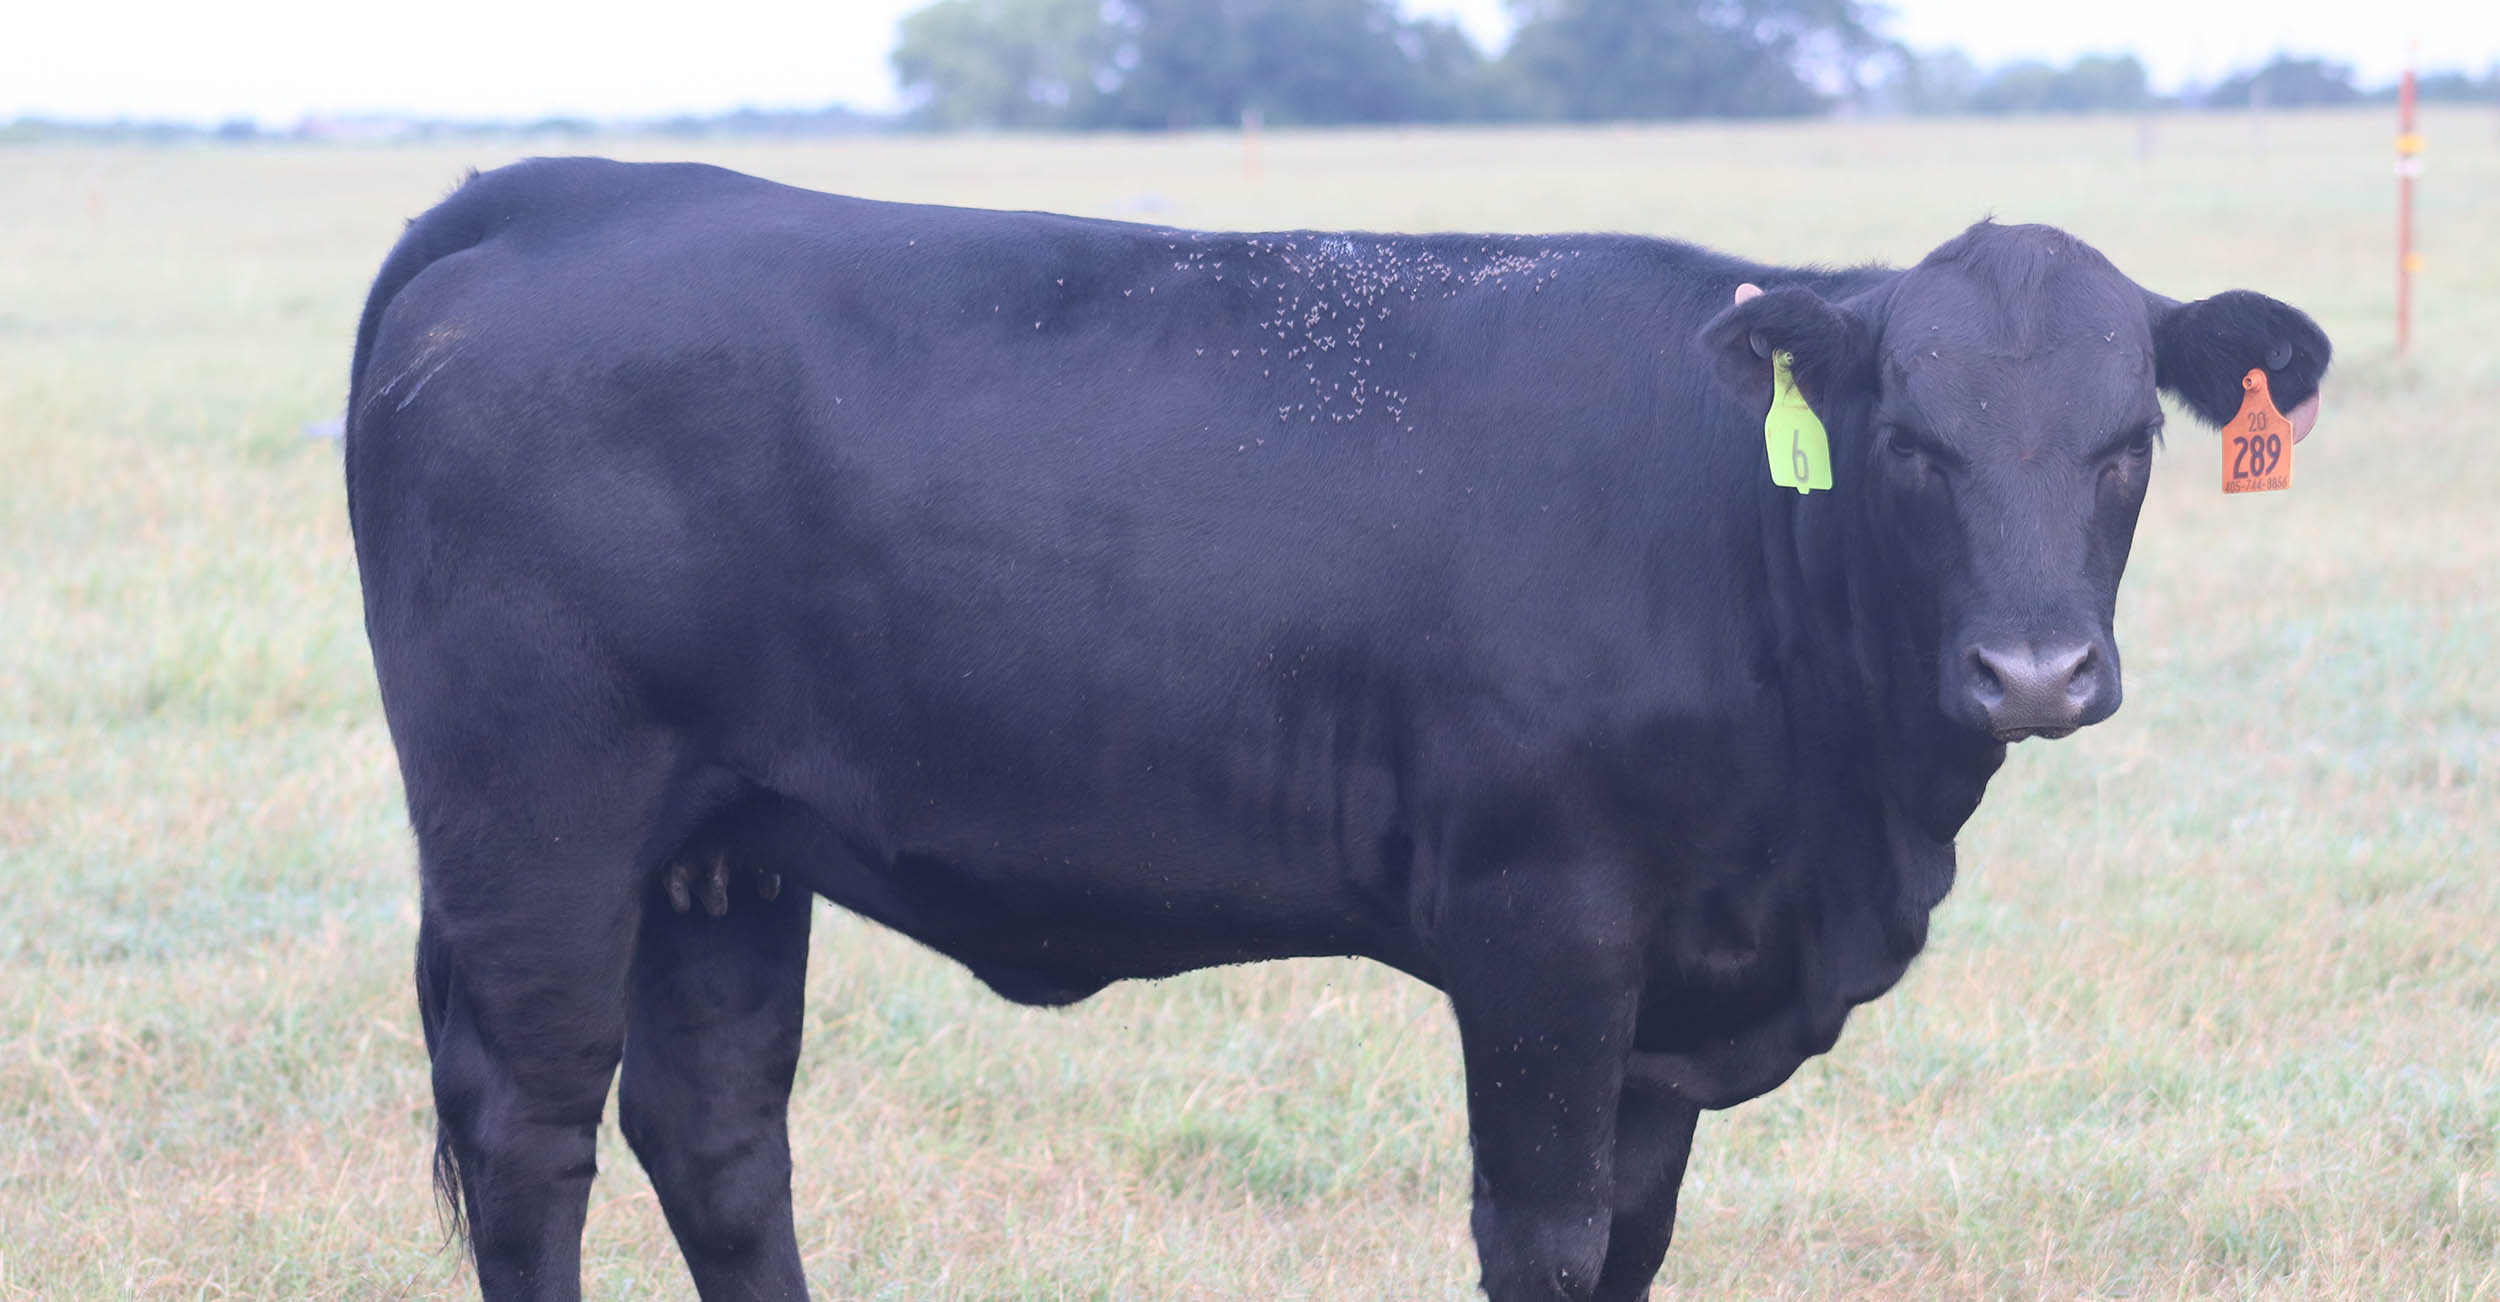 Cattle producers are battling flies and ticks this summer Oklahoma